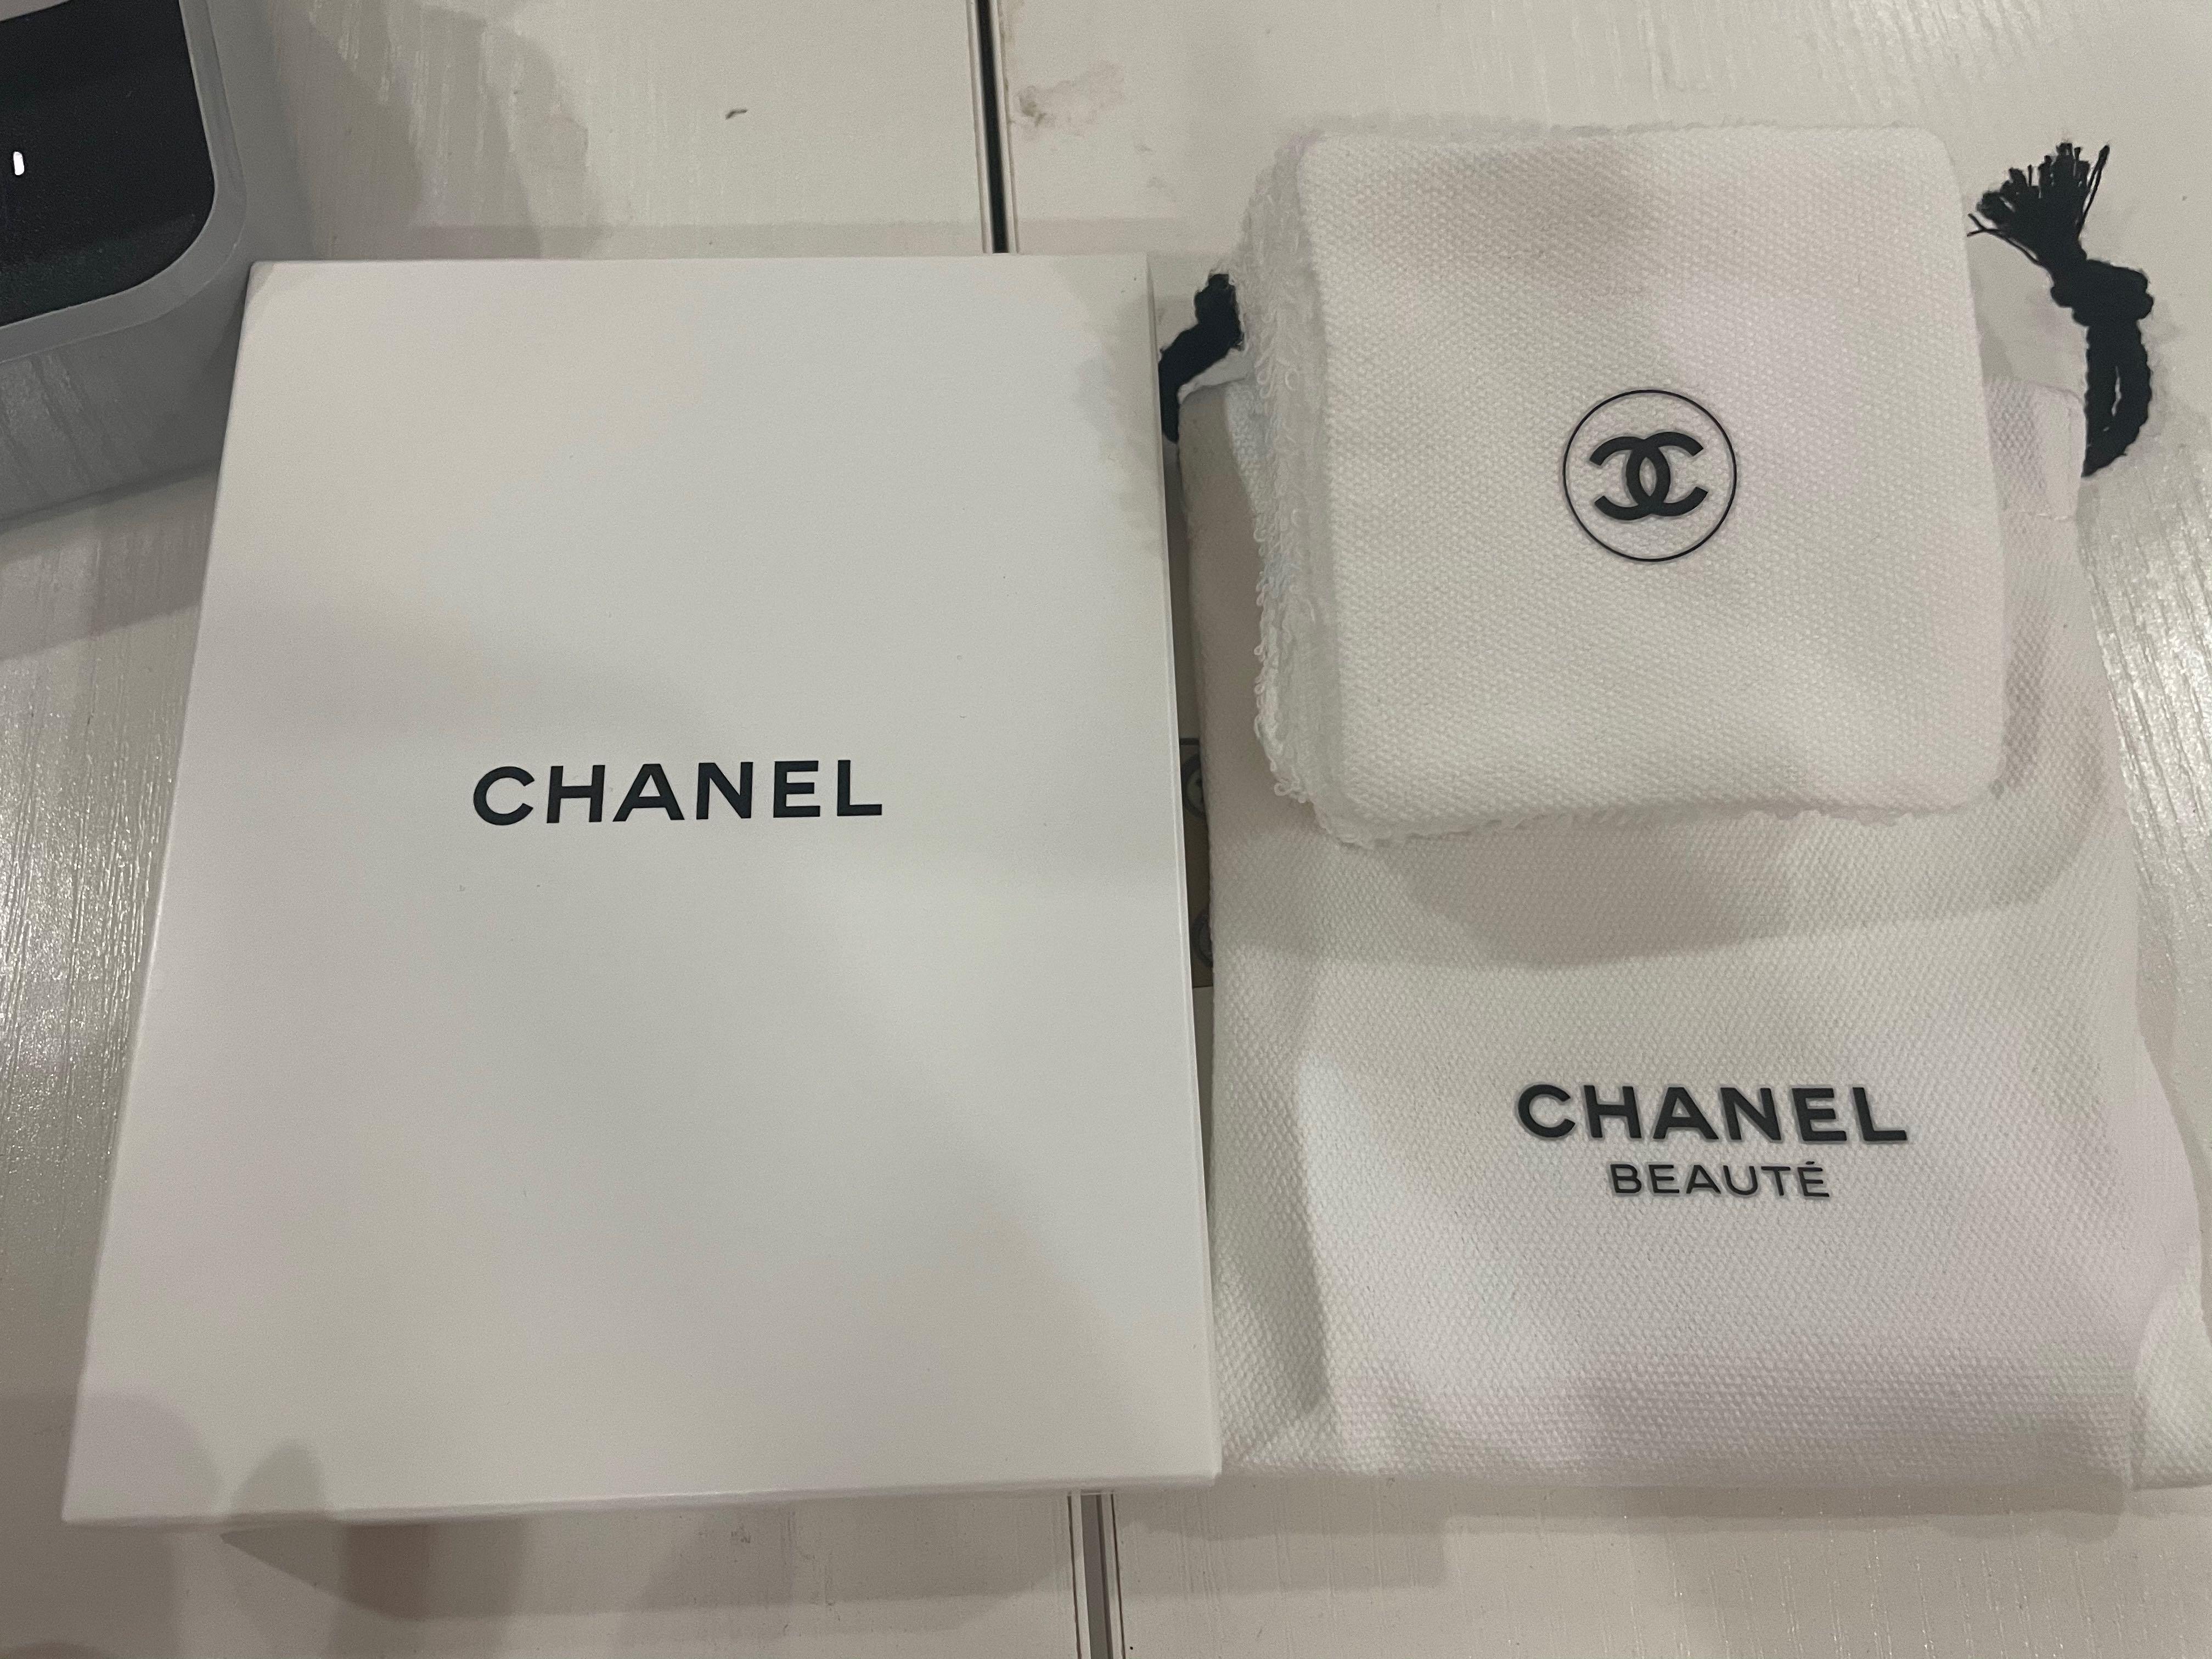 Le Coton extra soft cotton pads from #Chanel feel so plush on the skin